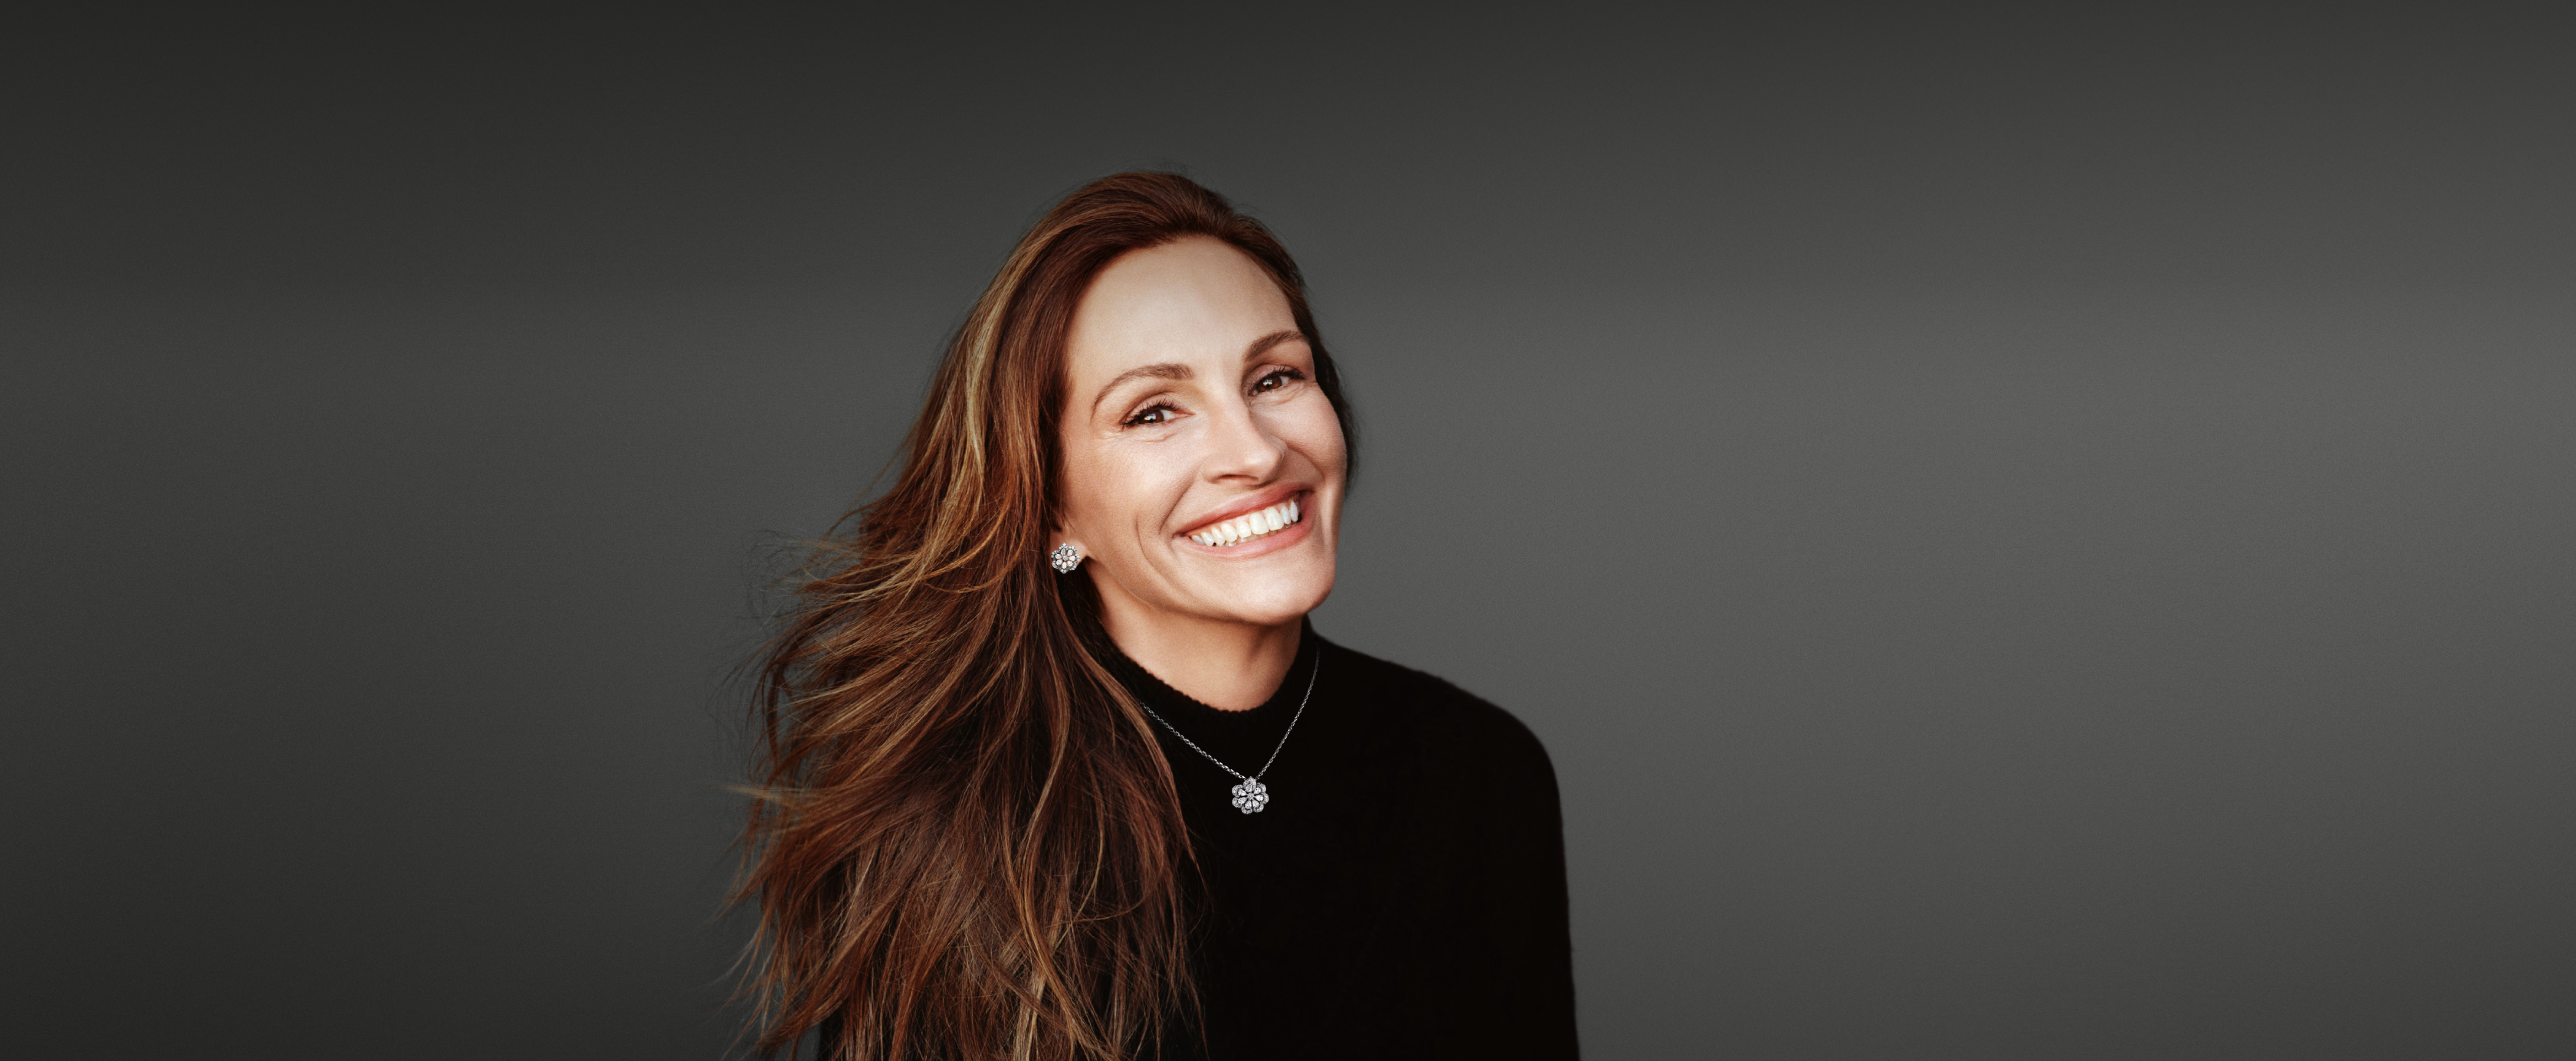 Julia Roberts wears Precious Lace, Chopard’s stylistic signature and a new vision of Haute Joaillerie: light, lively and supremely feminine